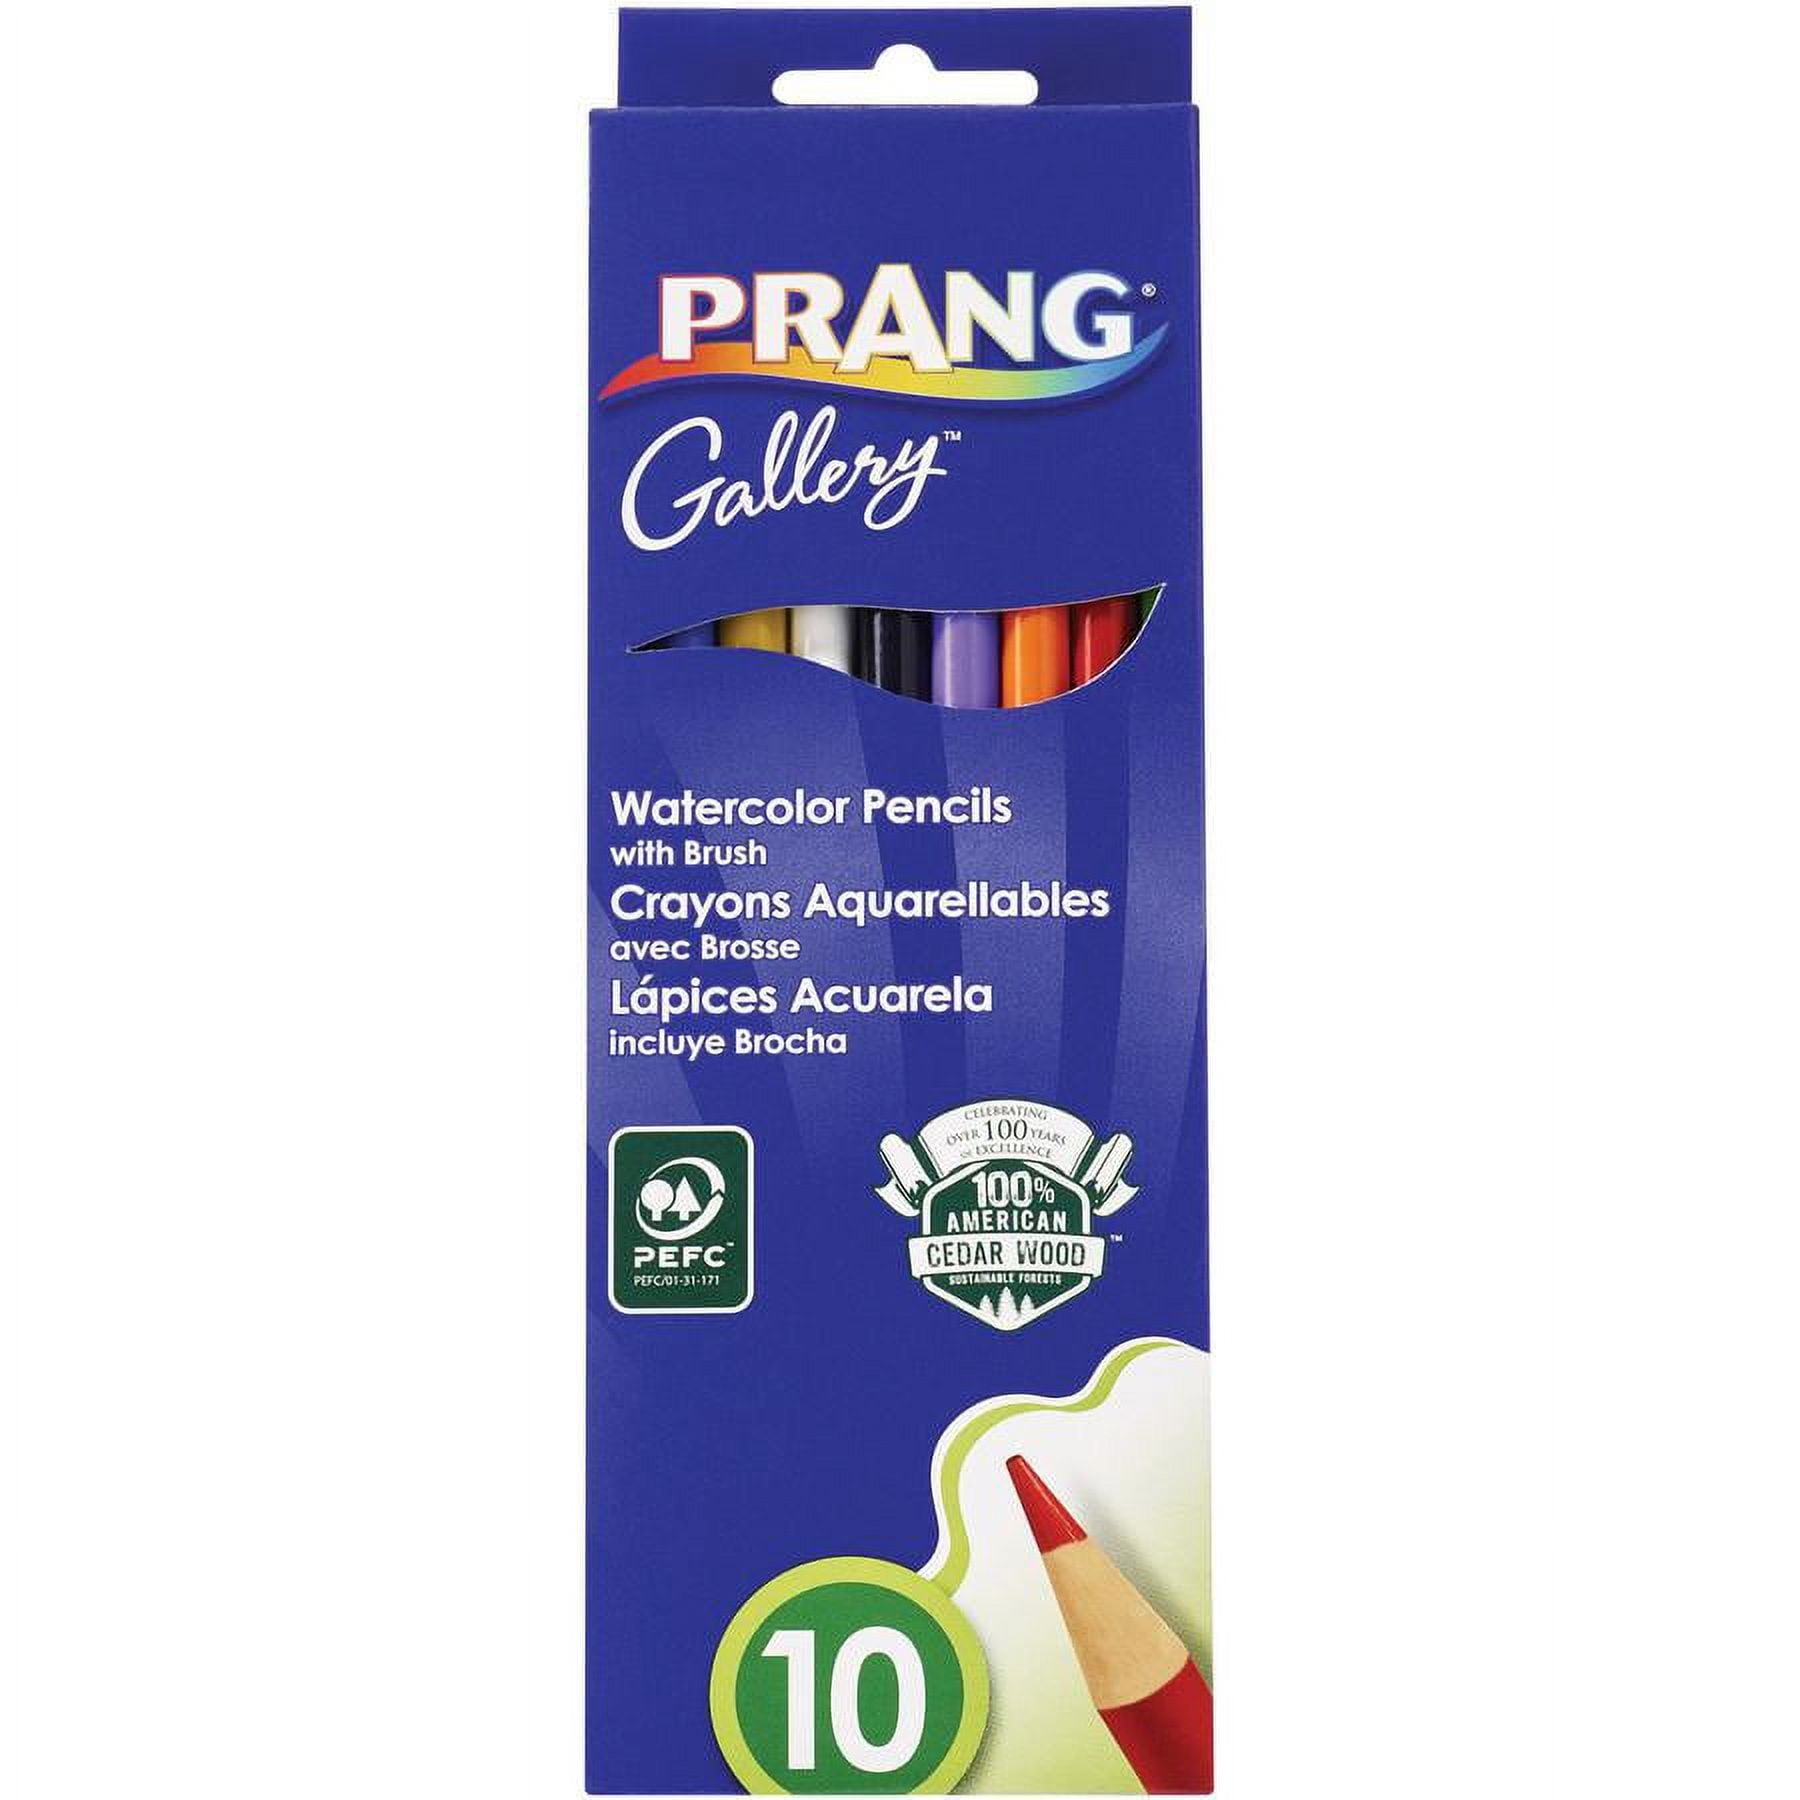 Prang Sharpened Watercolor Pencils - Red, Orange, Yellow, Green, Blue,  Violet, Light Blue, Black, Brown, White Lead - 10 / Pack - Comp-U-Charge Inc